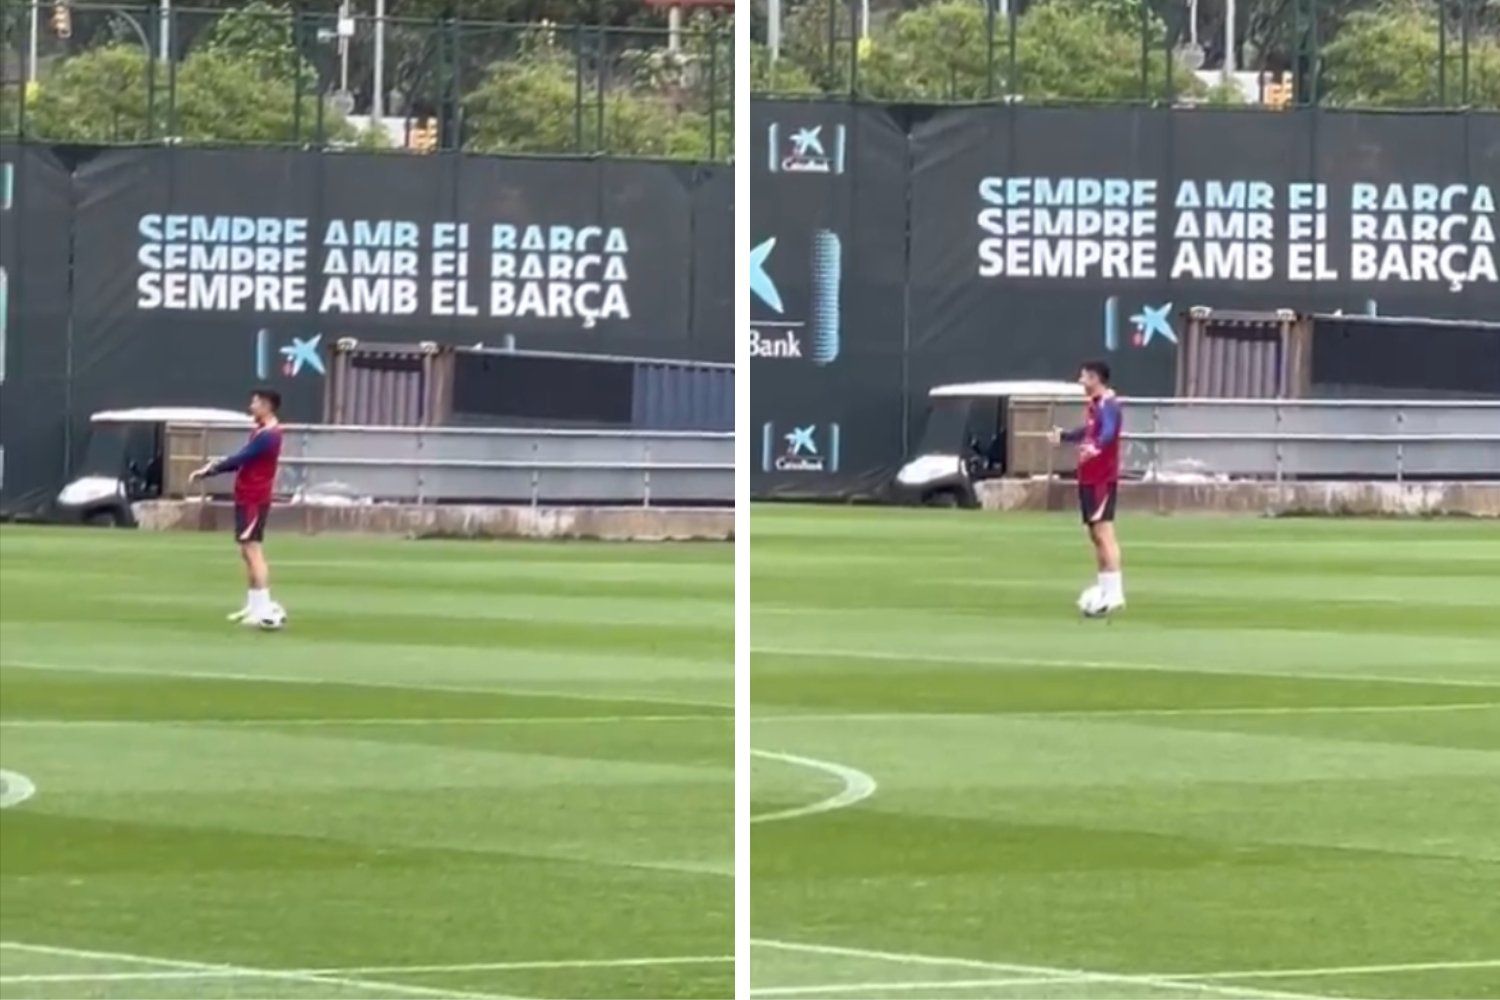 WATCH: Robert Lewandowski left to train alone for 10 minutes by Barcelona squad